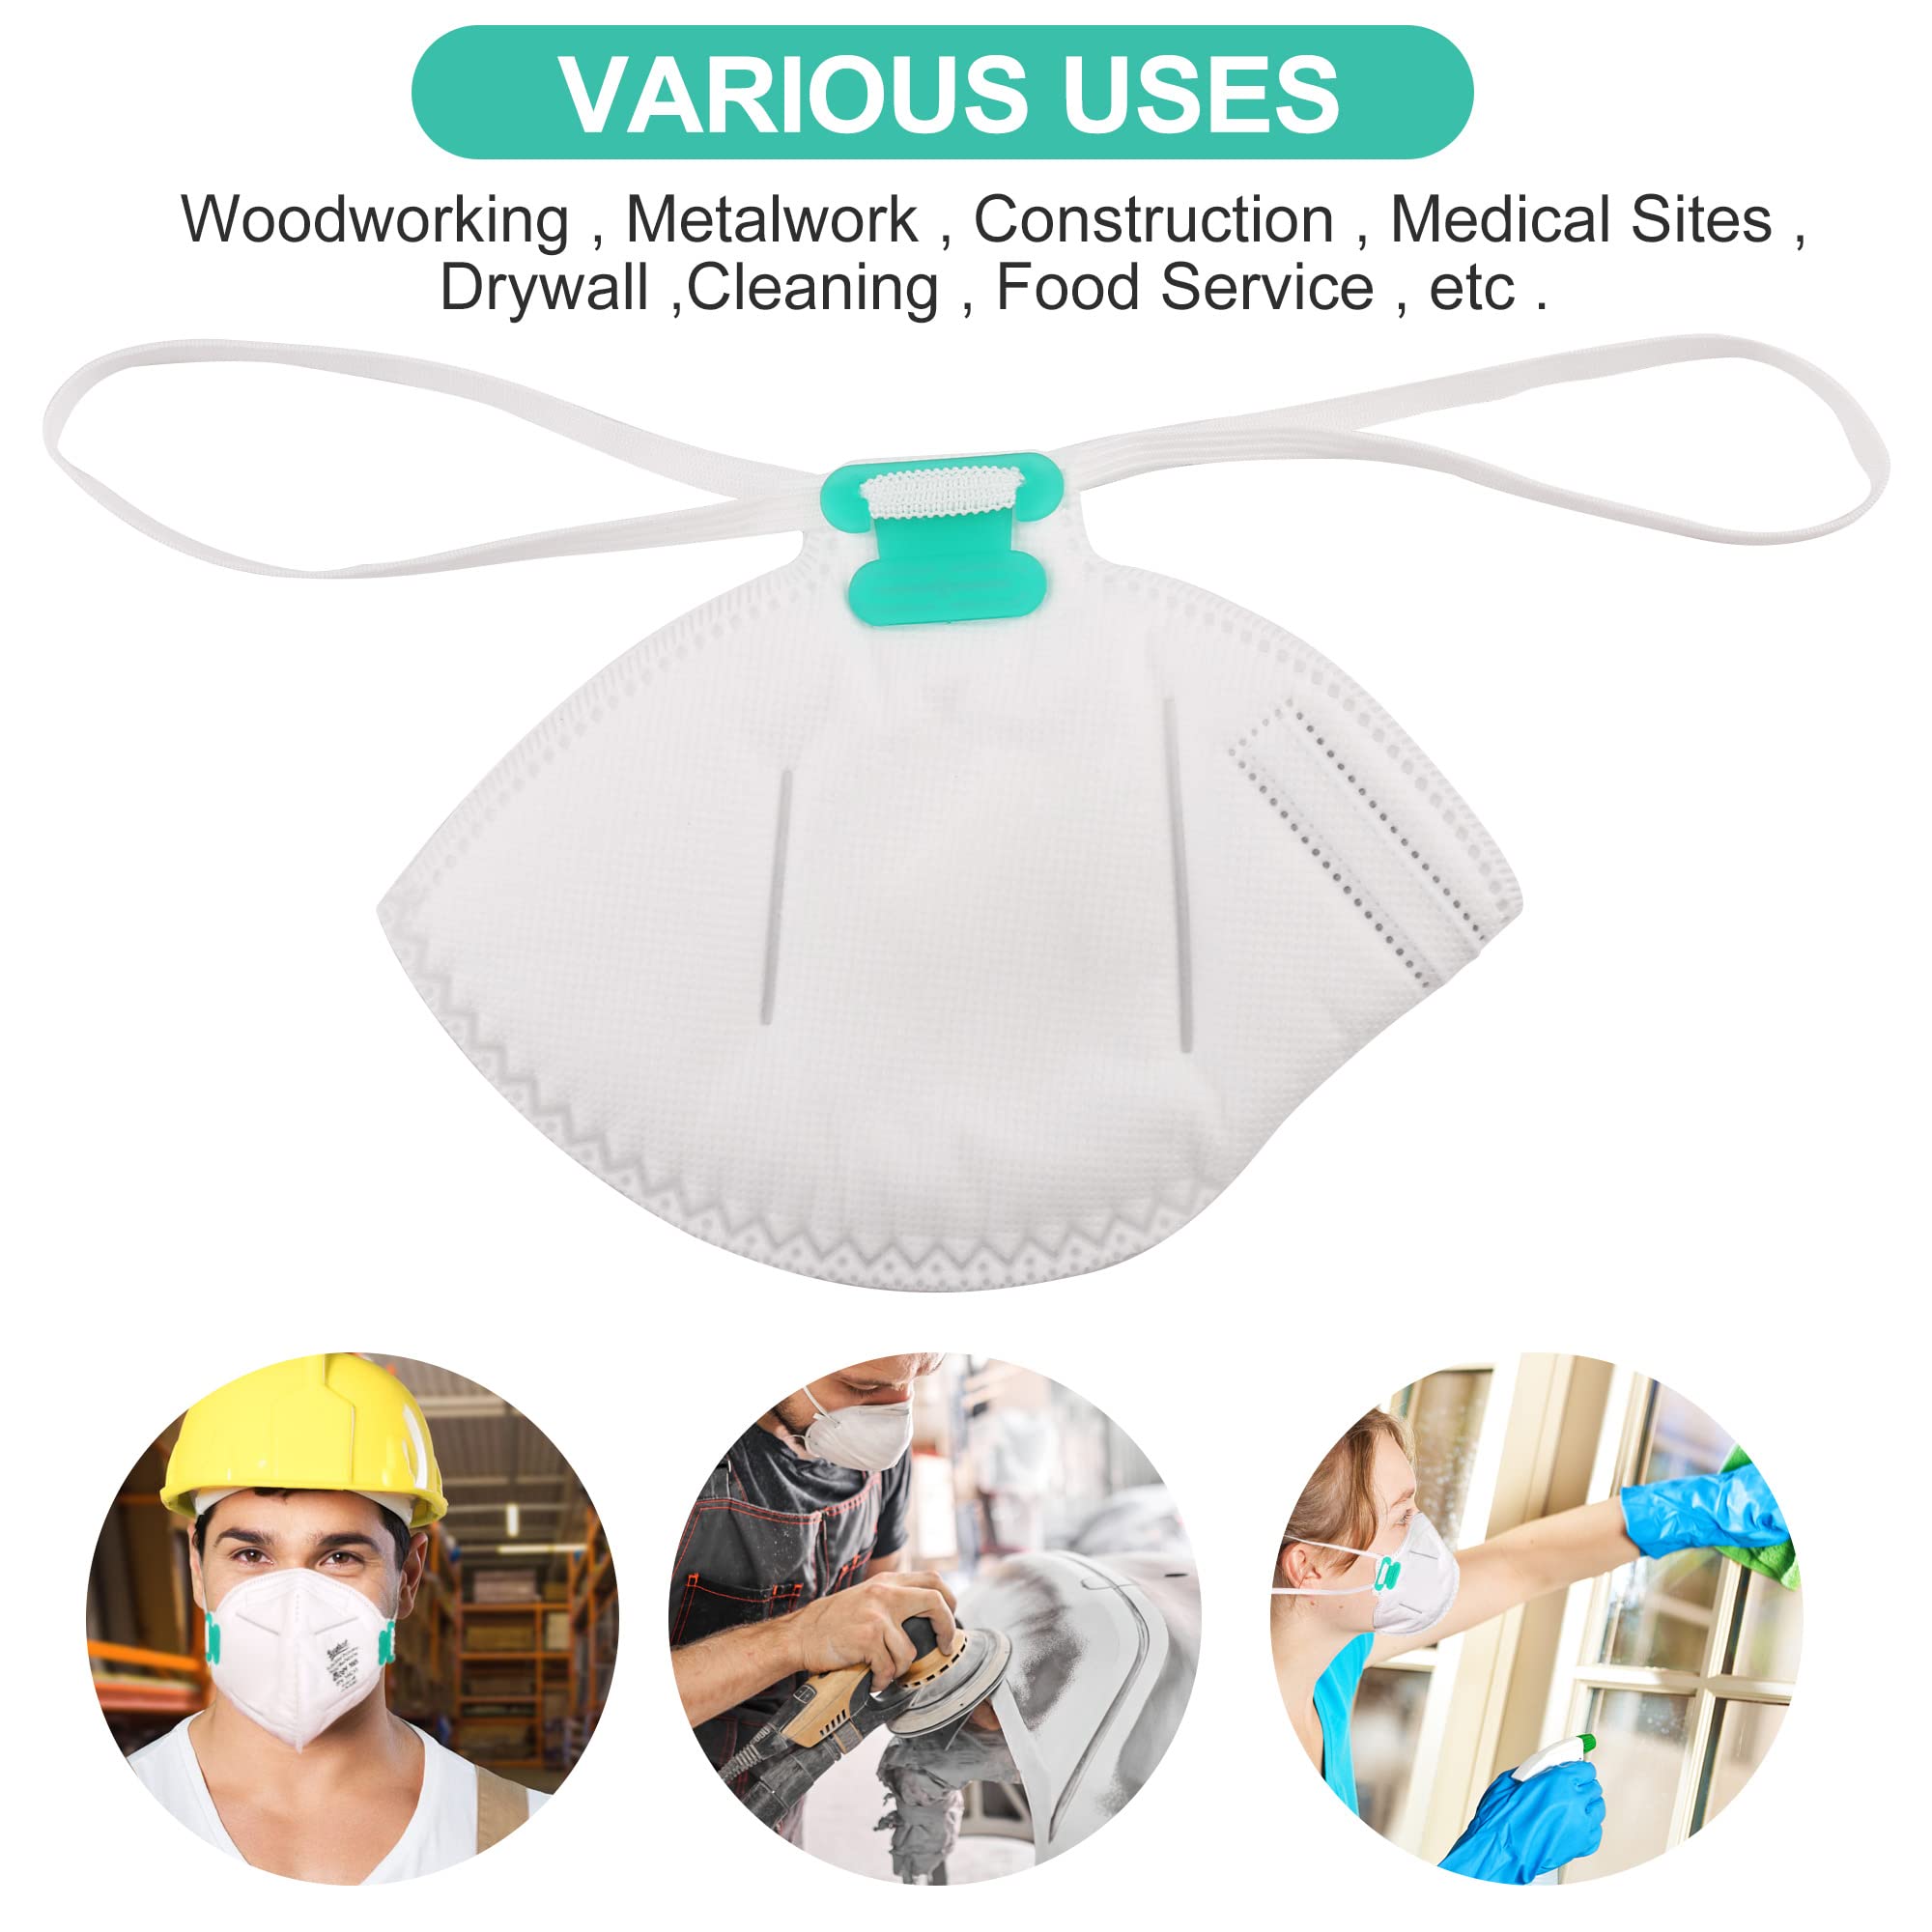 LotFancy NIOSH N95 Mask, 20PCS Particulate Respirator, N95 Face Mask for Construction, Cleaning, Disposable Air Filter Masks against Dust, Pollution, Particle, Smoke